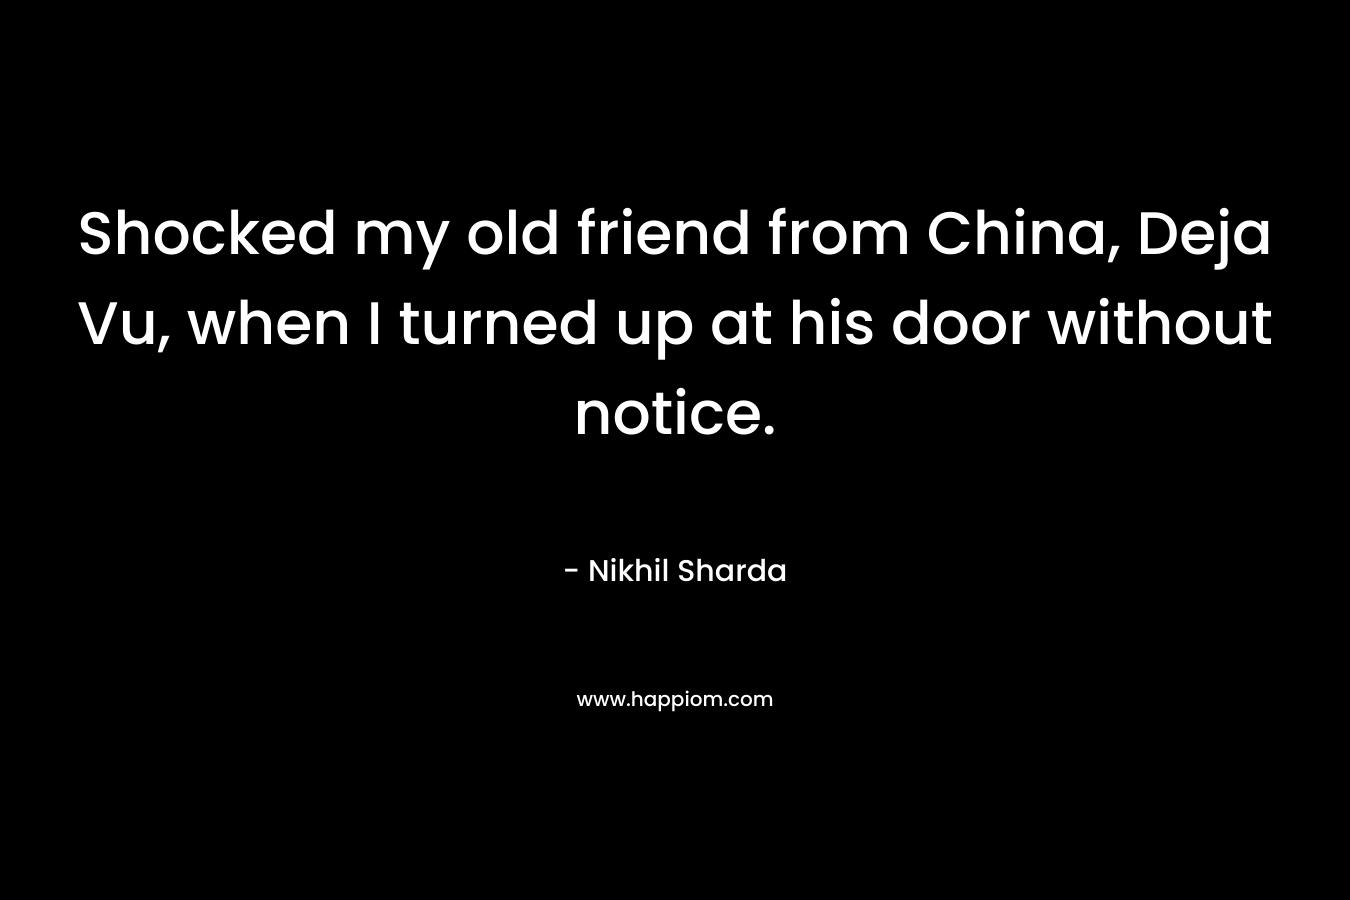 Shocked my old friend from China, Deja Vu, when I turned up at his door without notice. – Nikhil Sharda